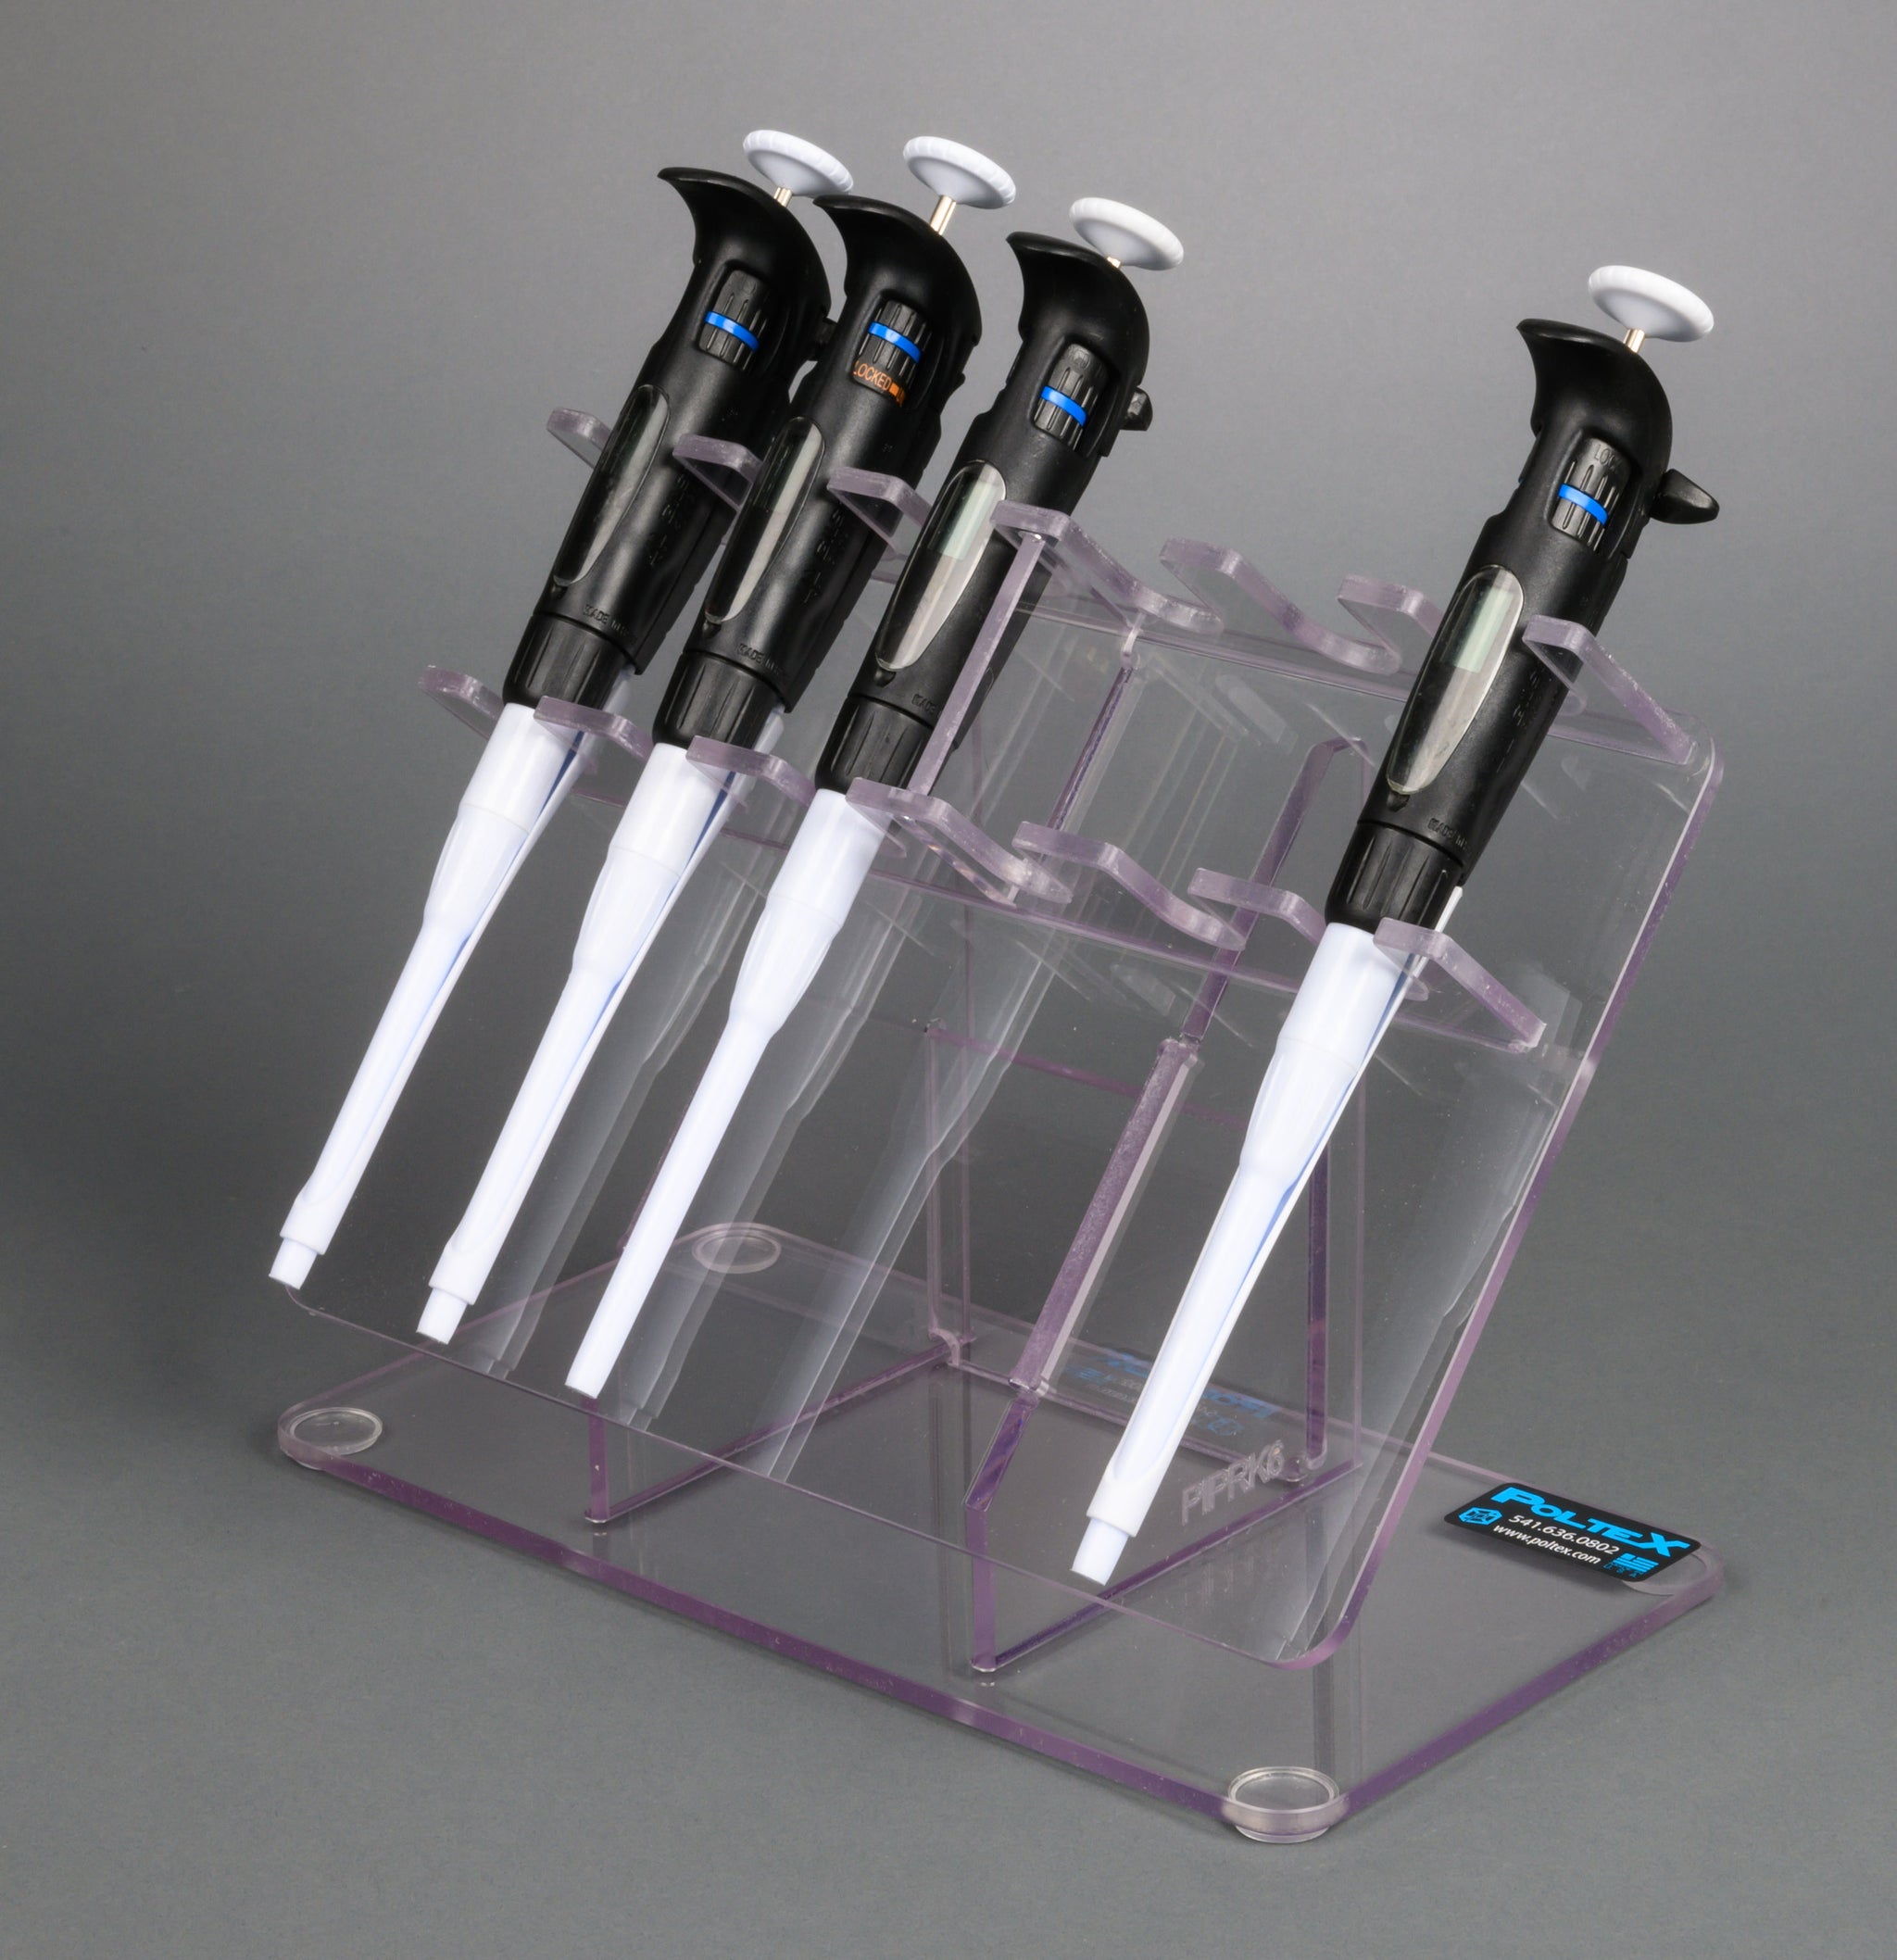 Pipette 23.6.13 download the last version for mac